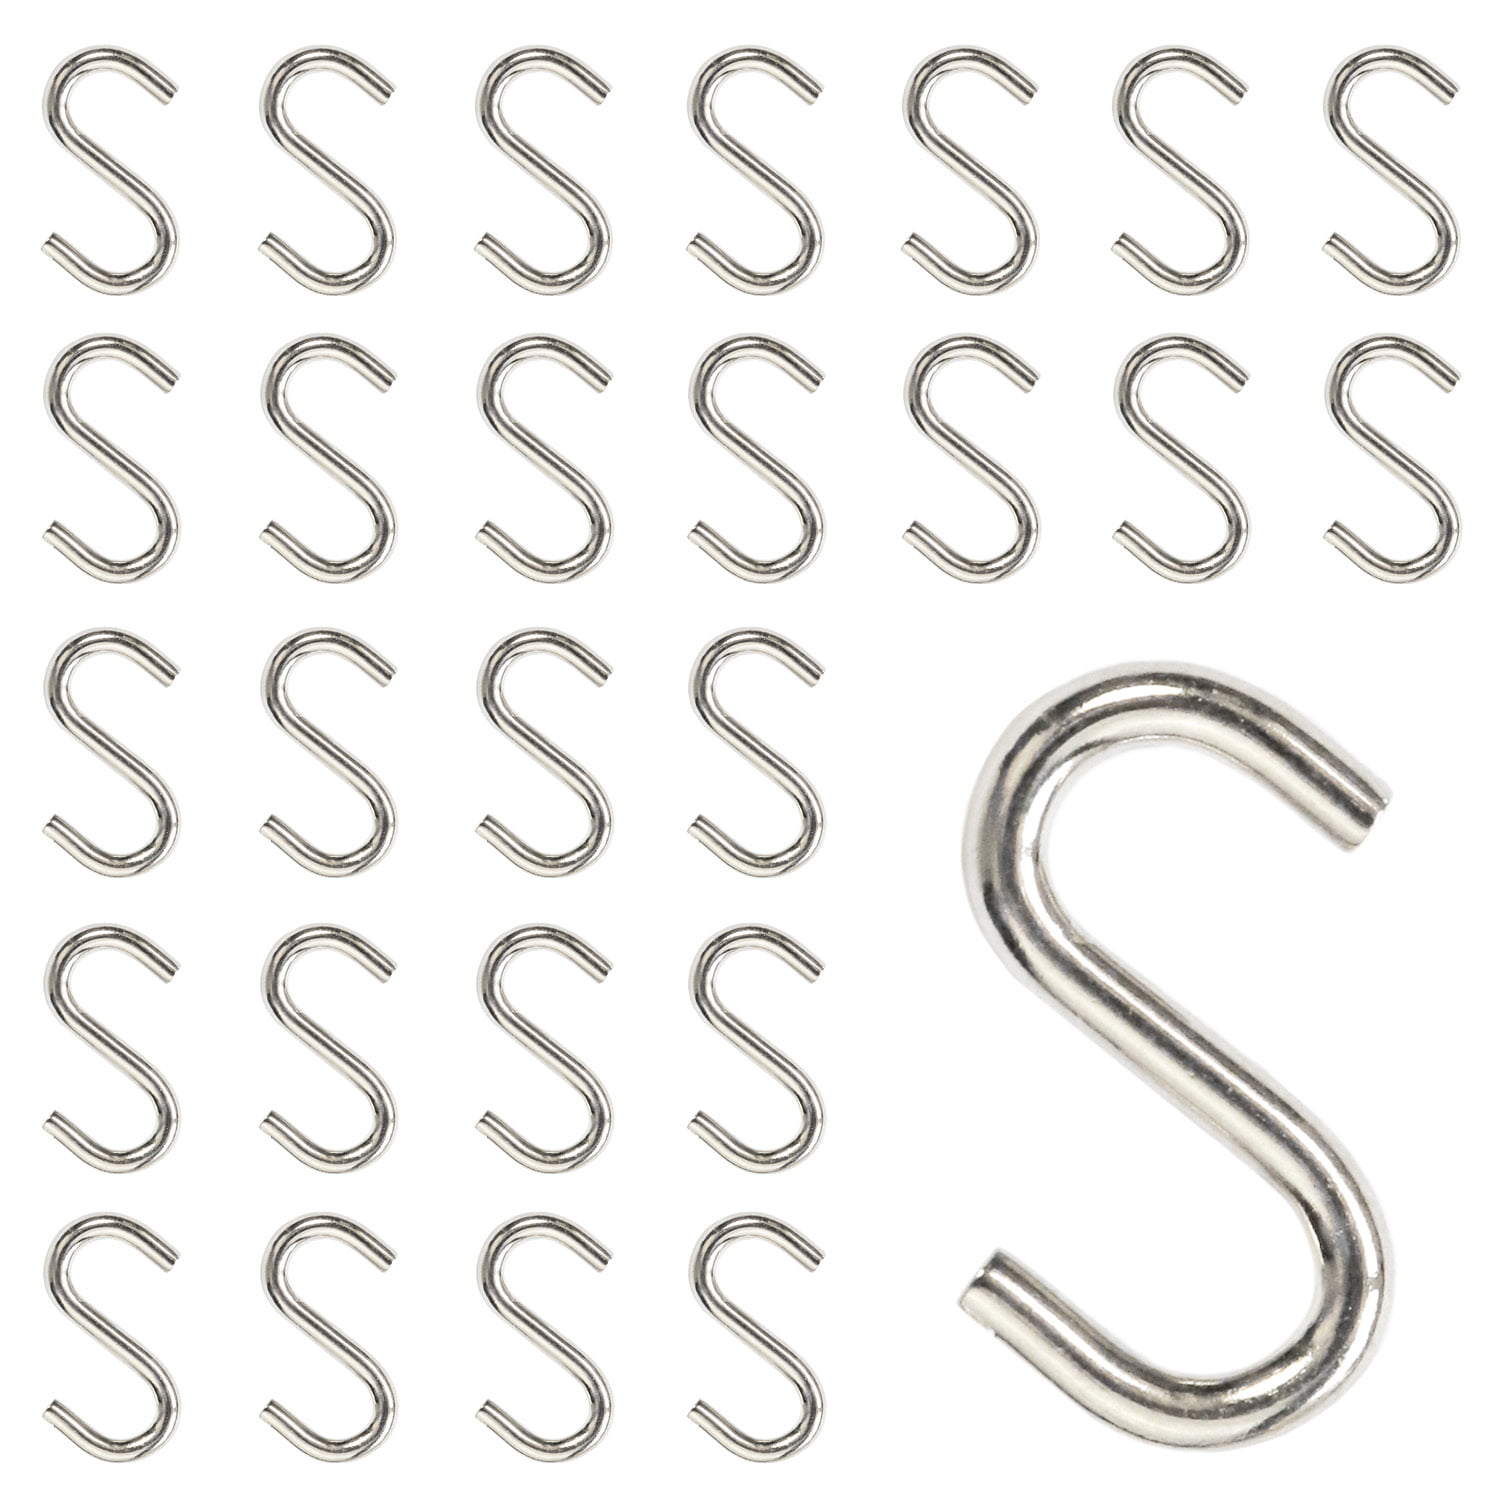 Length: 3cm//1.18inch S - 10 Pieces Stainless Steel Mini S Shaped Hooks Heavy Duty Multifunction Utility Hangers for Kitchen Bedroom Office LINVINC 10-30 Pack S Hooks Hanging